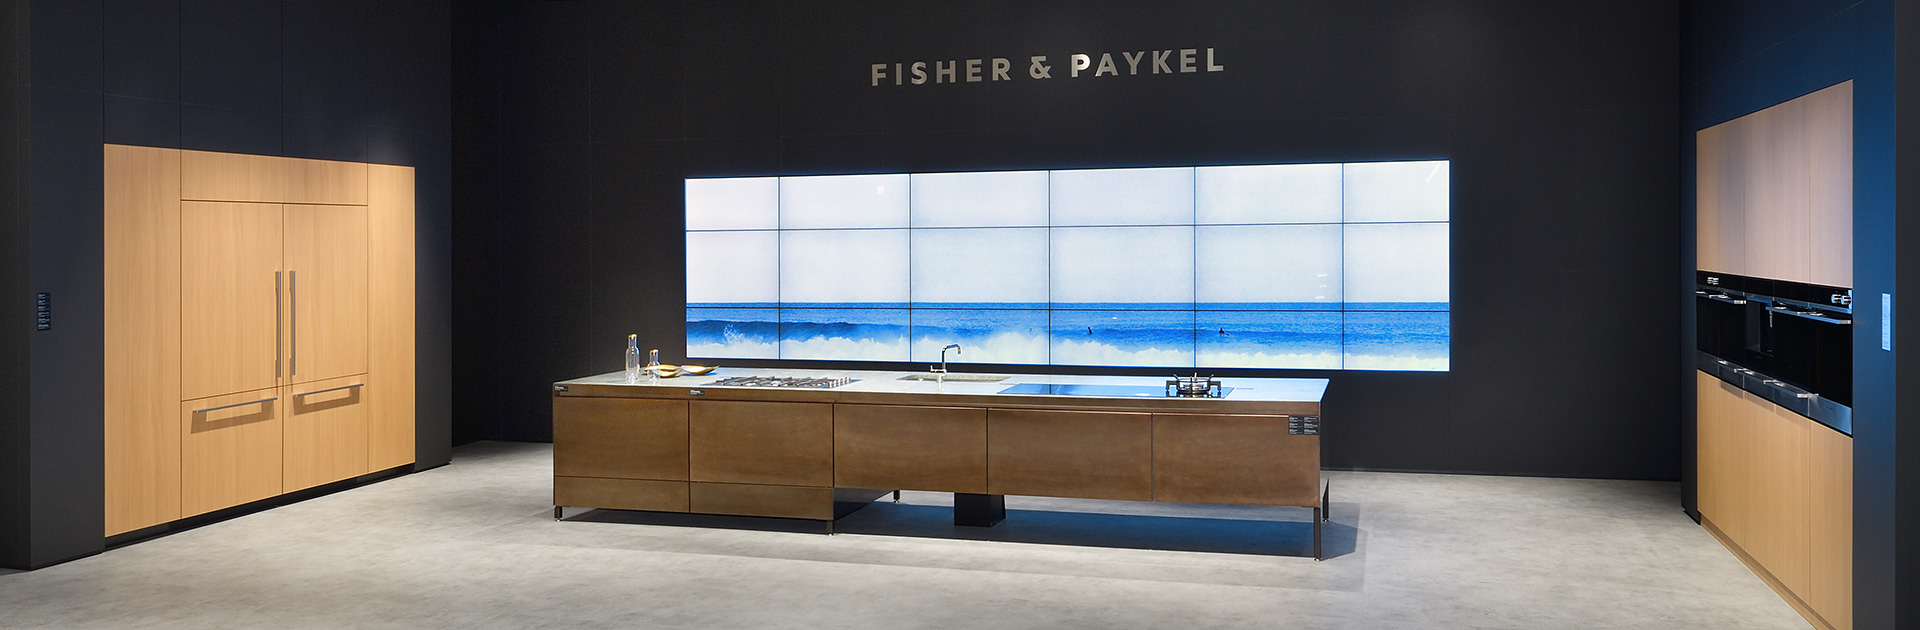 As exhibition stand builder in Berlin at the IFA responsible for the exhibition stand of Fisher&Paykel